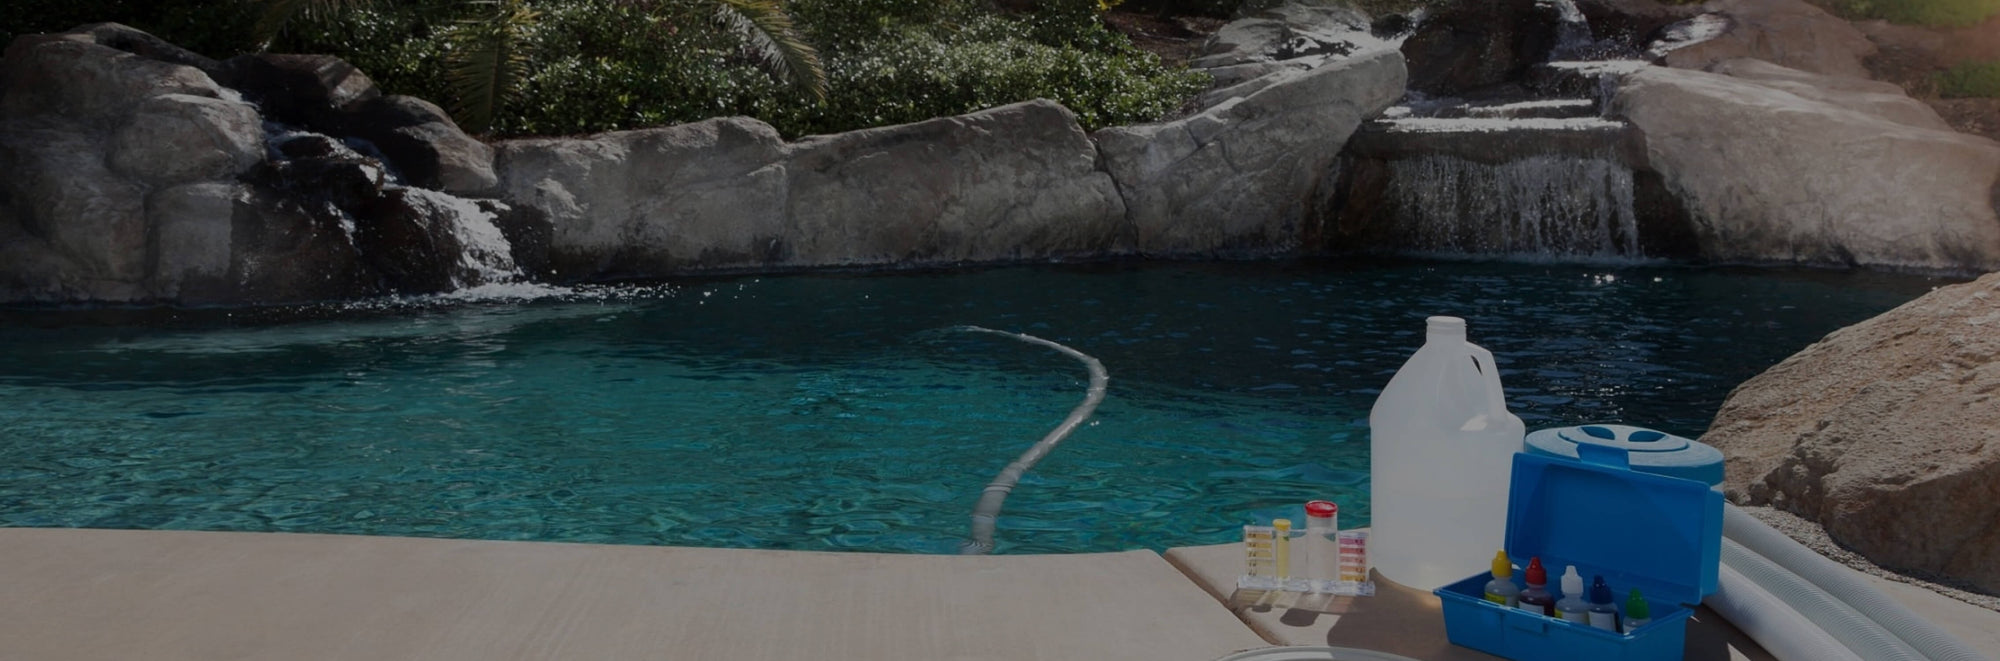 Perfect-Pools-Products-By-The-Pool